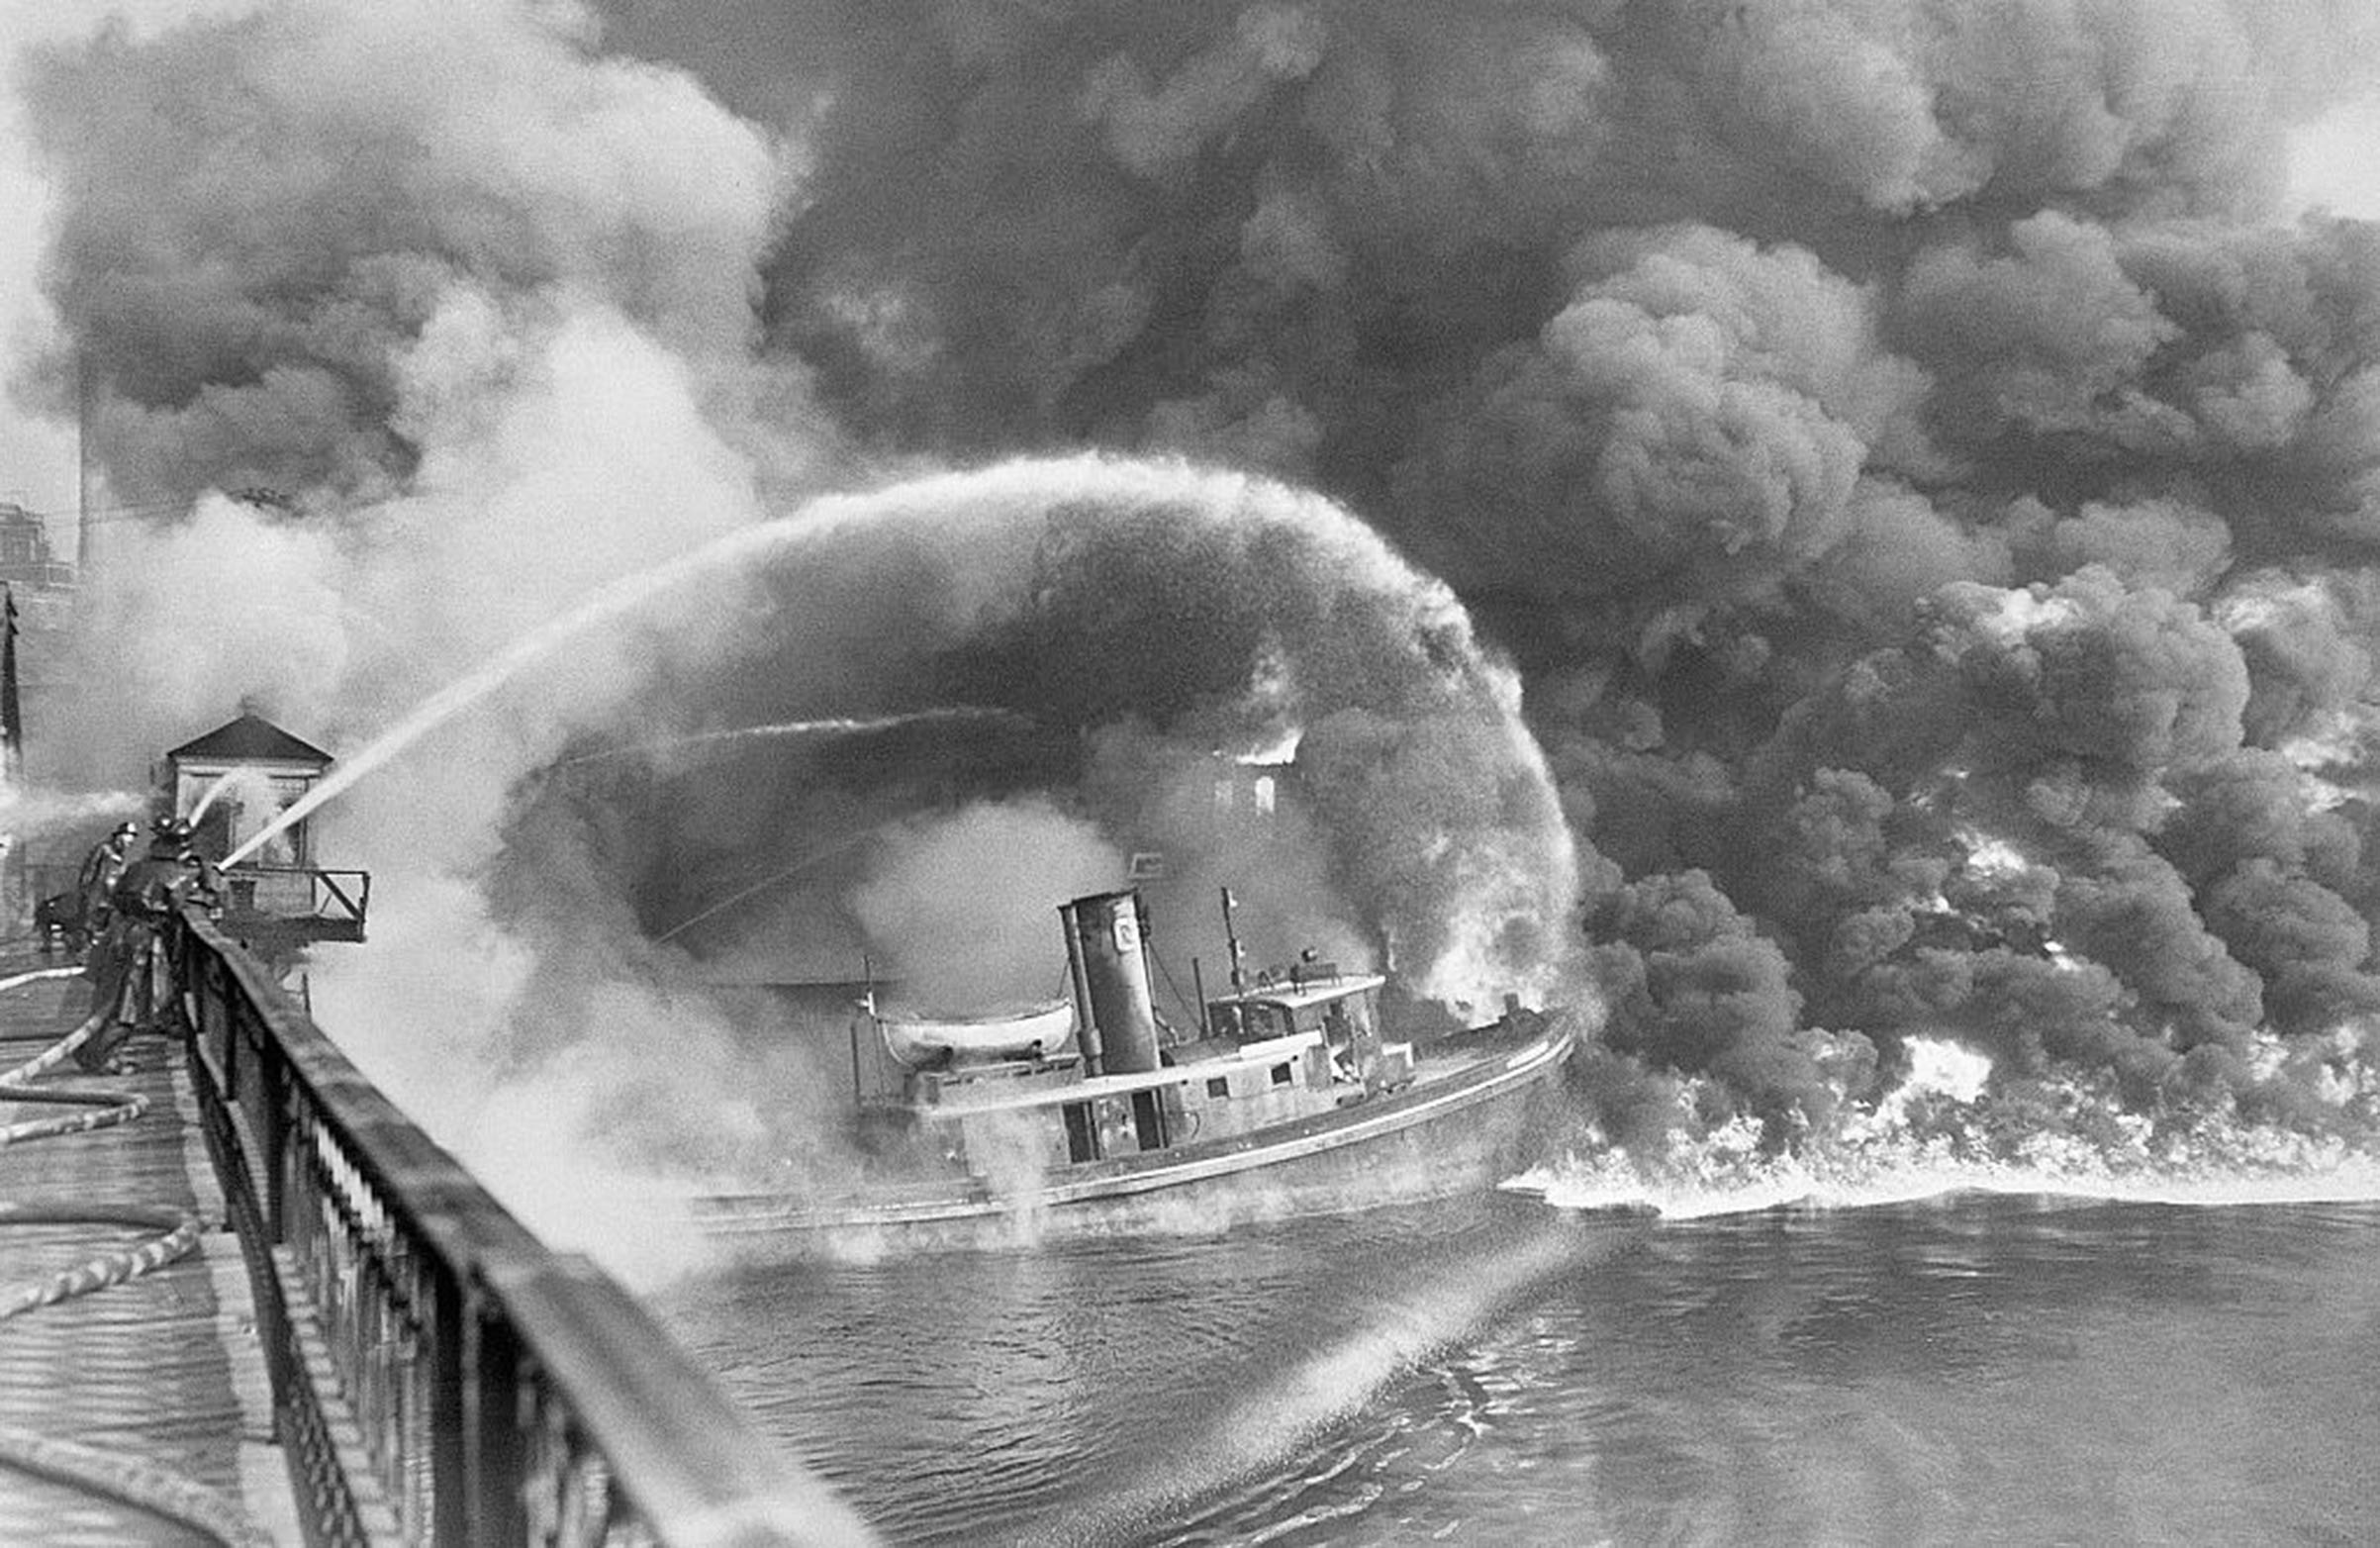 Firemen trying to put out a 1952 blaze on the Cuyahoga River. (Bettmann—Getty Images)